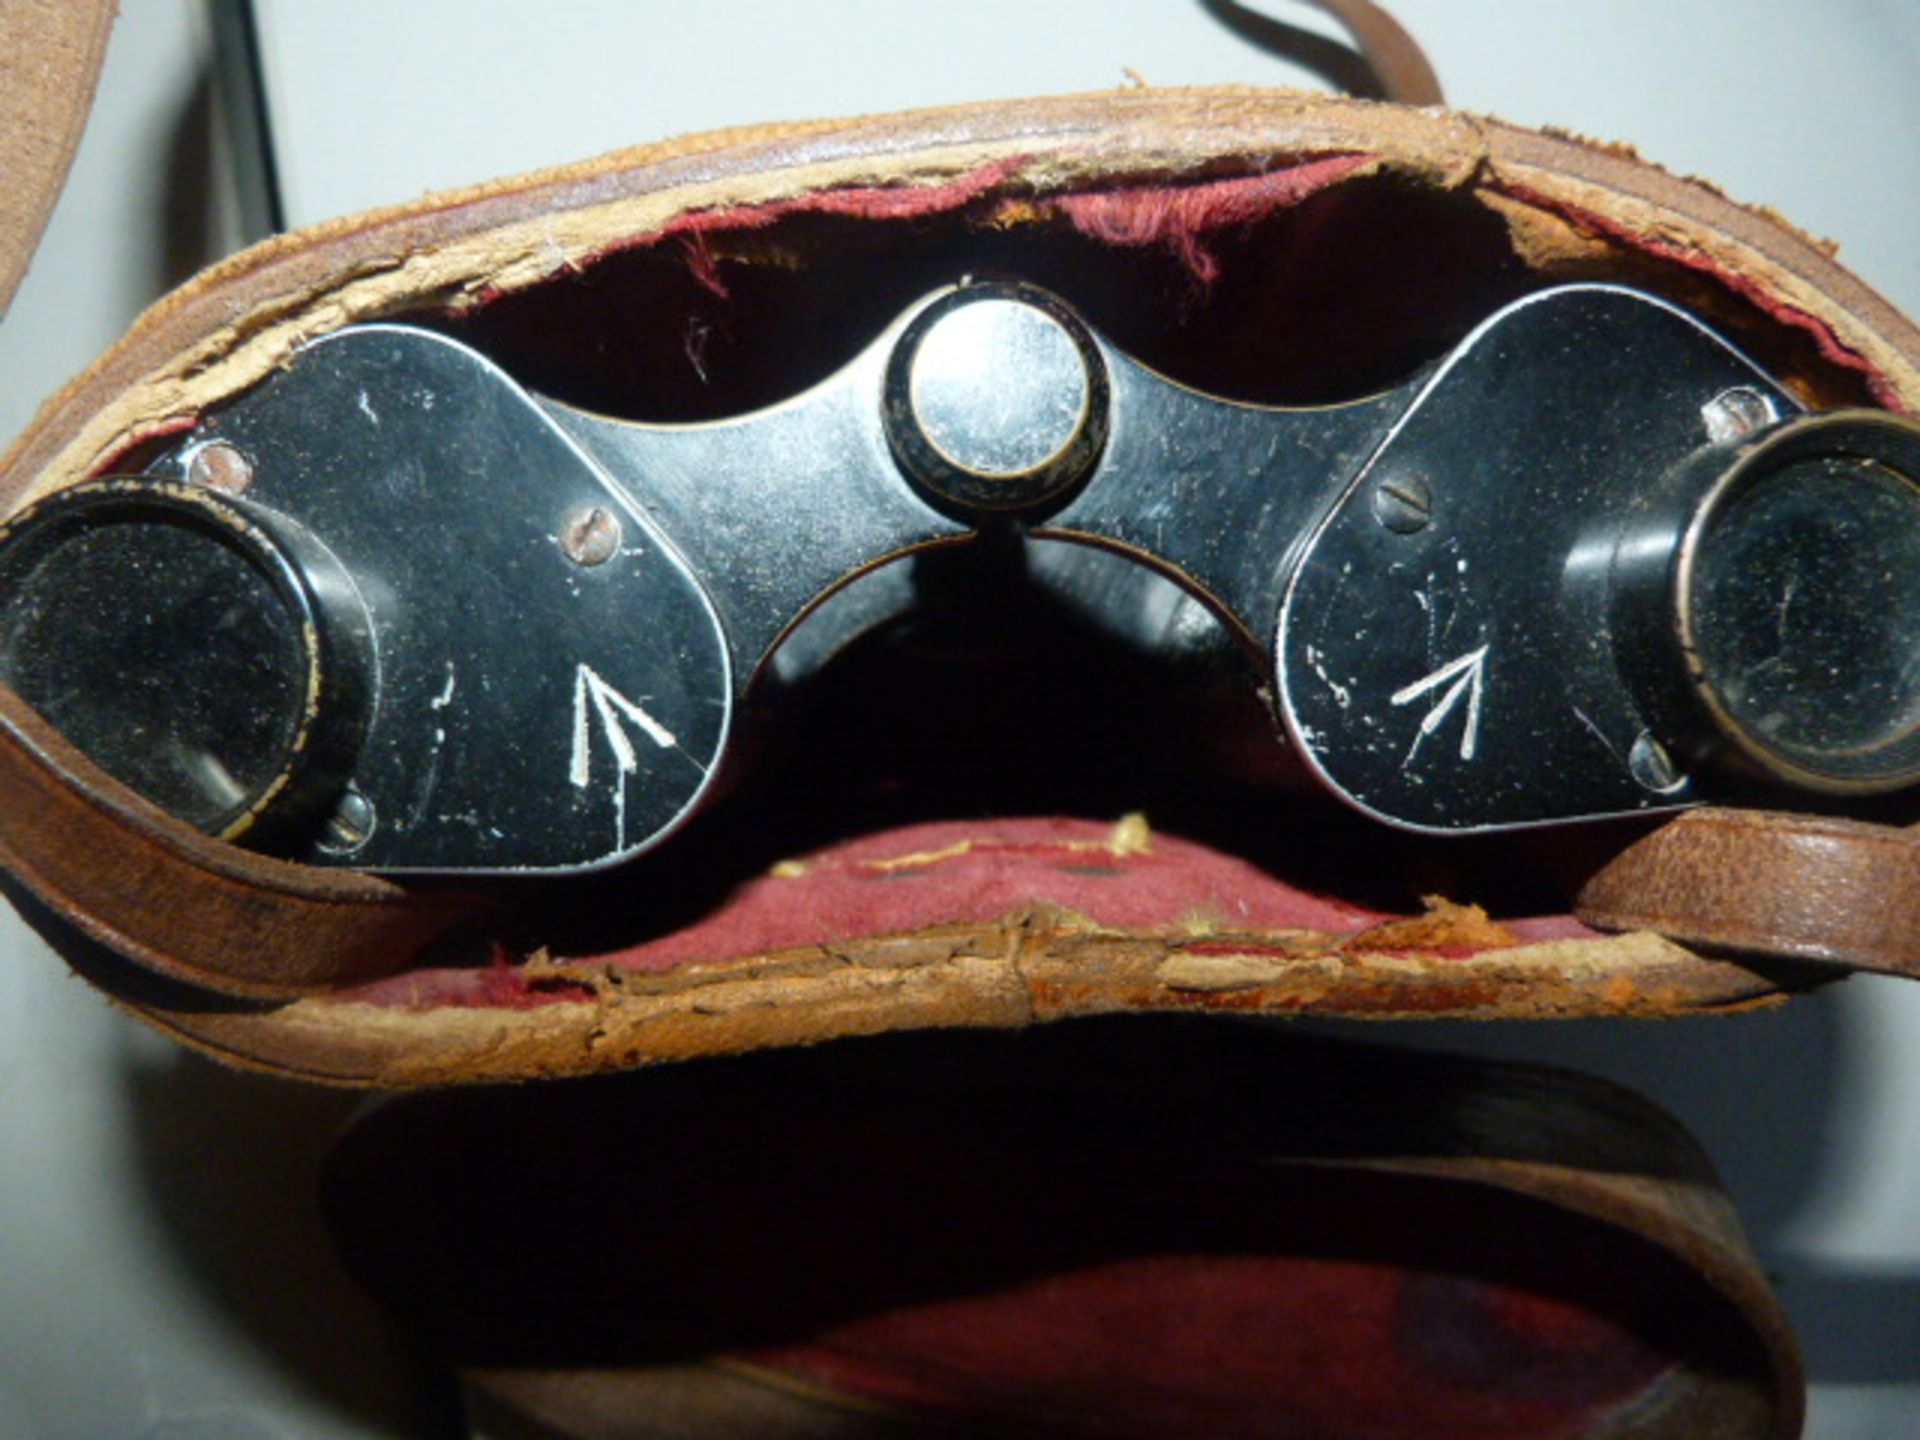 French Made Military Binoculars in Leather Case - Image 2 of 2